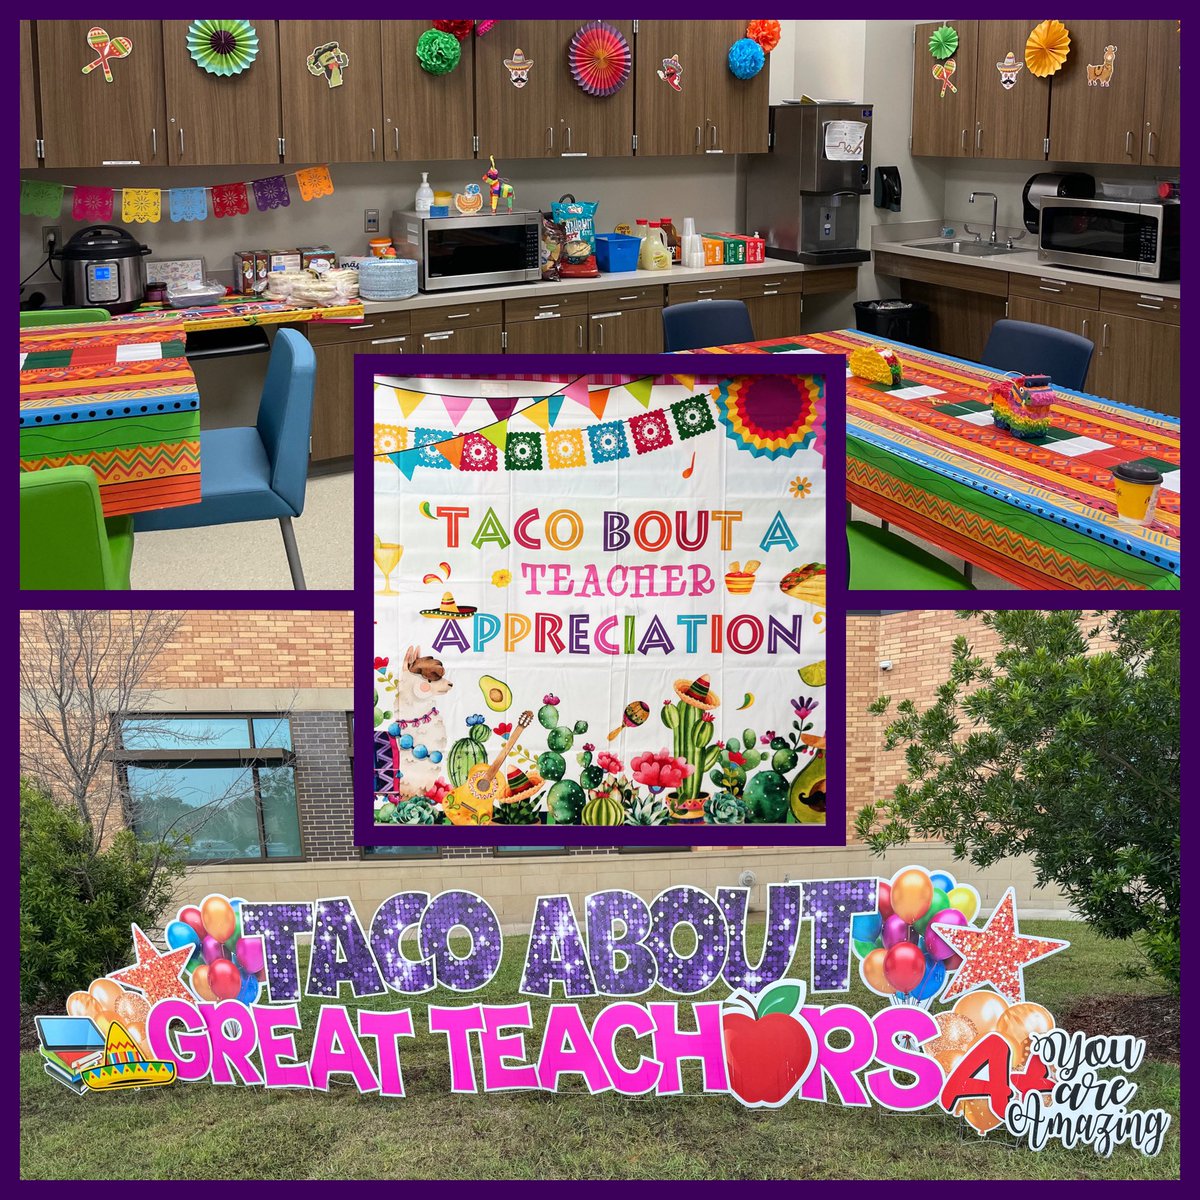 Our teachers are the absolute best! We love to show them just how much we appreciate their support, patience and love for our kiddos. #AceBlueJays #TeacherAppreciationWeek #TacoBoutOurTeachers